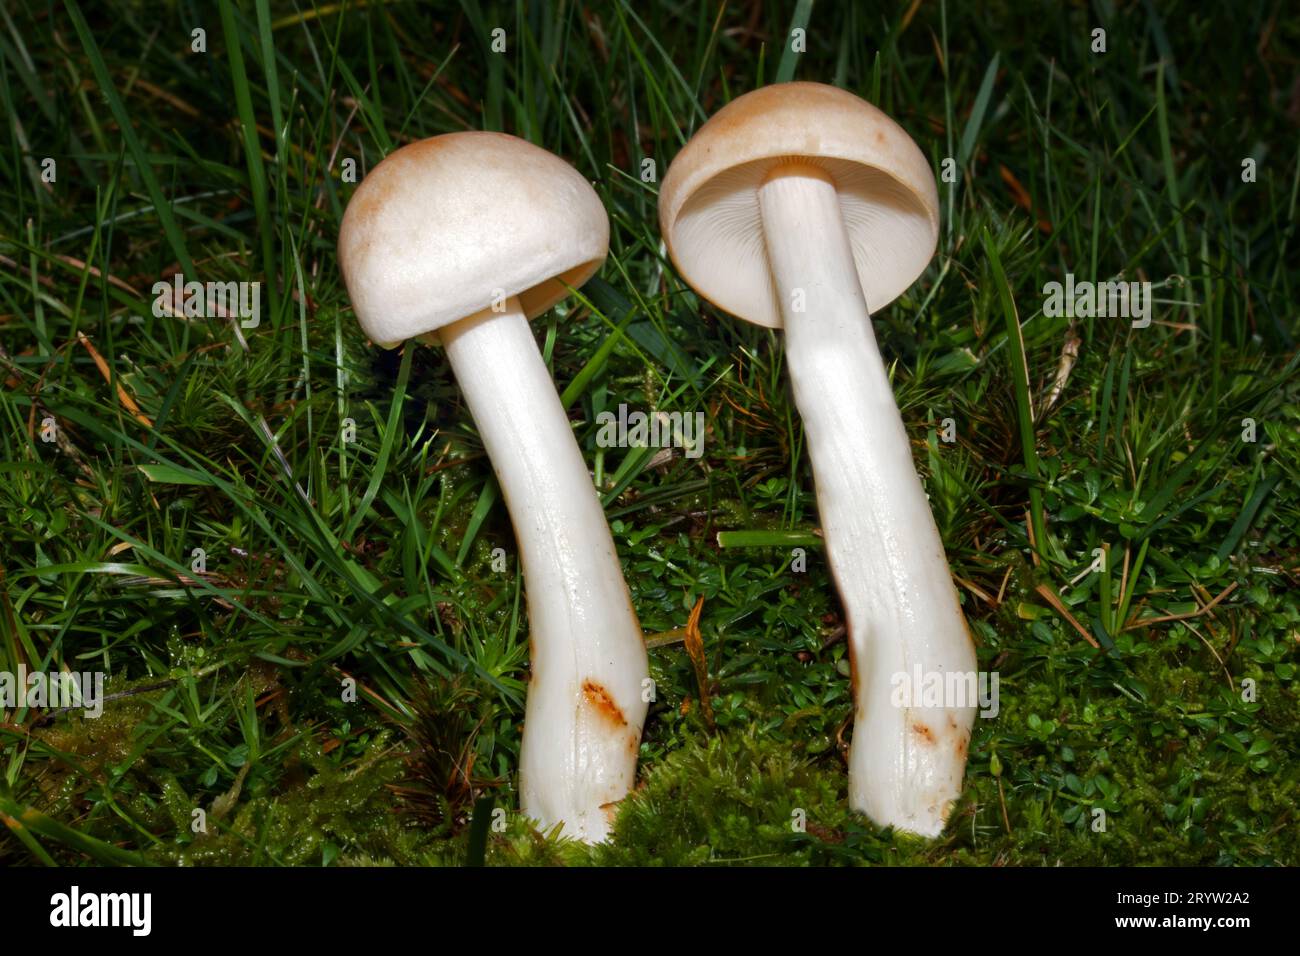 Rhodocollybia maculata (spotted toughshank) is a saprobic fungus found mainly under conifers. It occurs in Europe and North America. Stock Photo